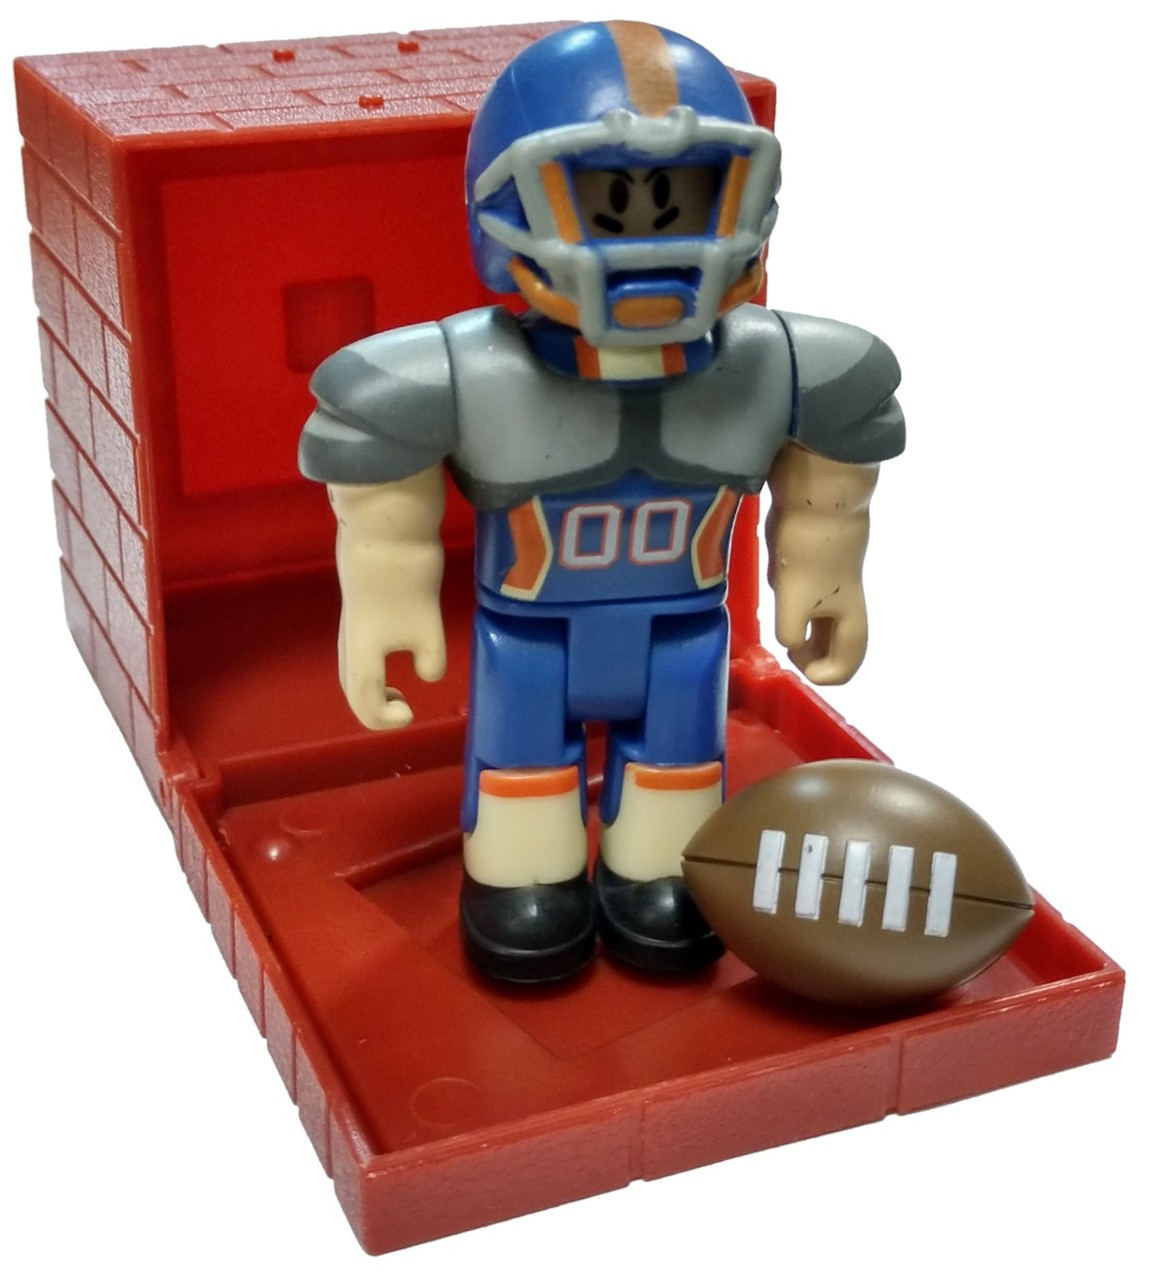 Roblox Red Series 4 Roblox High School Quarterback 3 Mini Figure With Red Cube And Online Code Loose Jazwares Toywiz - roblox high school roblox codes